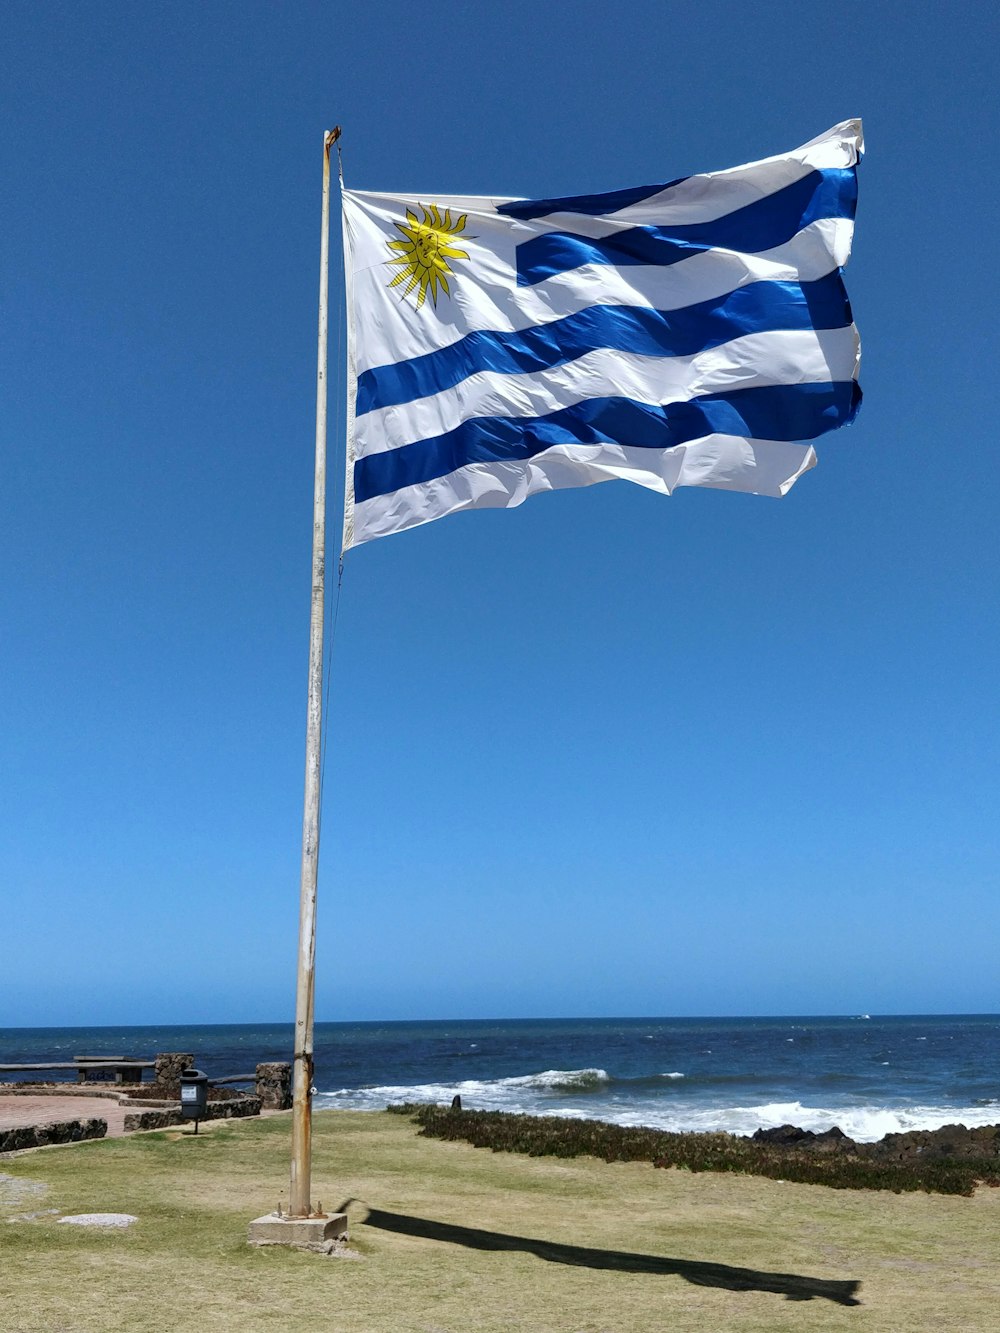 blue and white flag on pole near beach during daytime